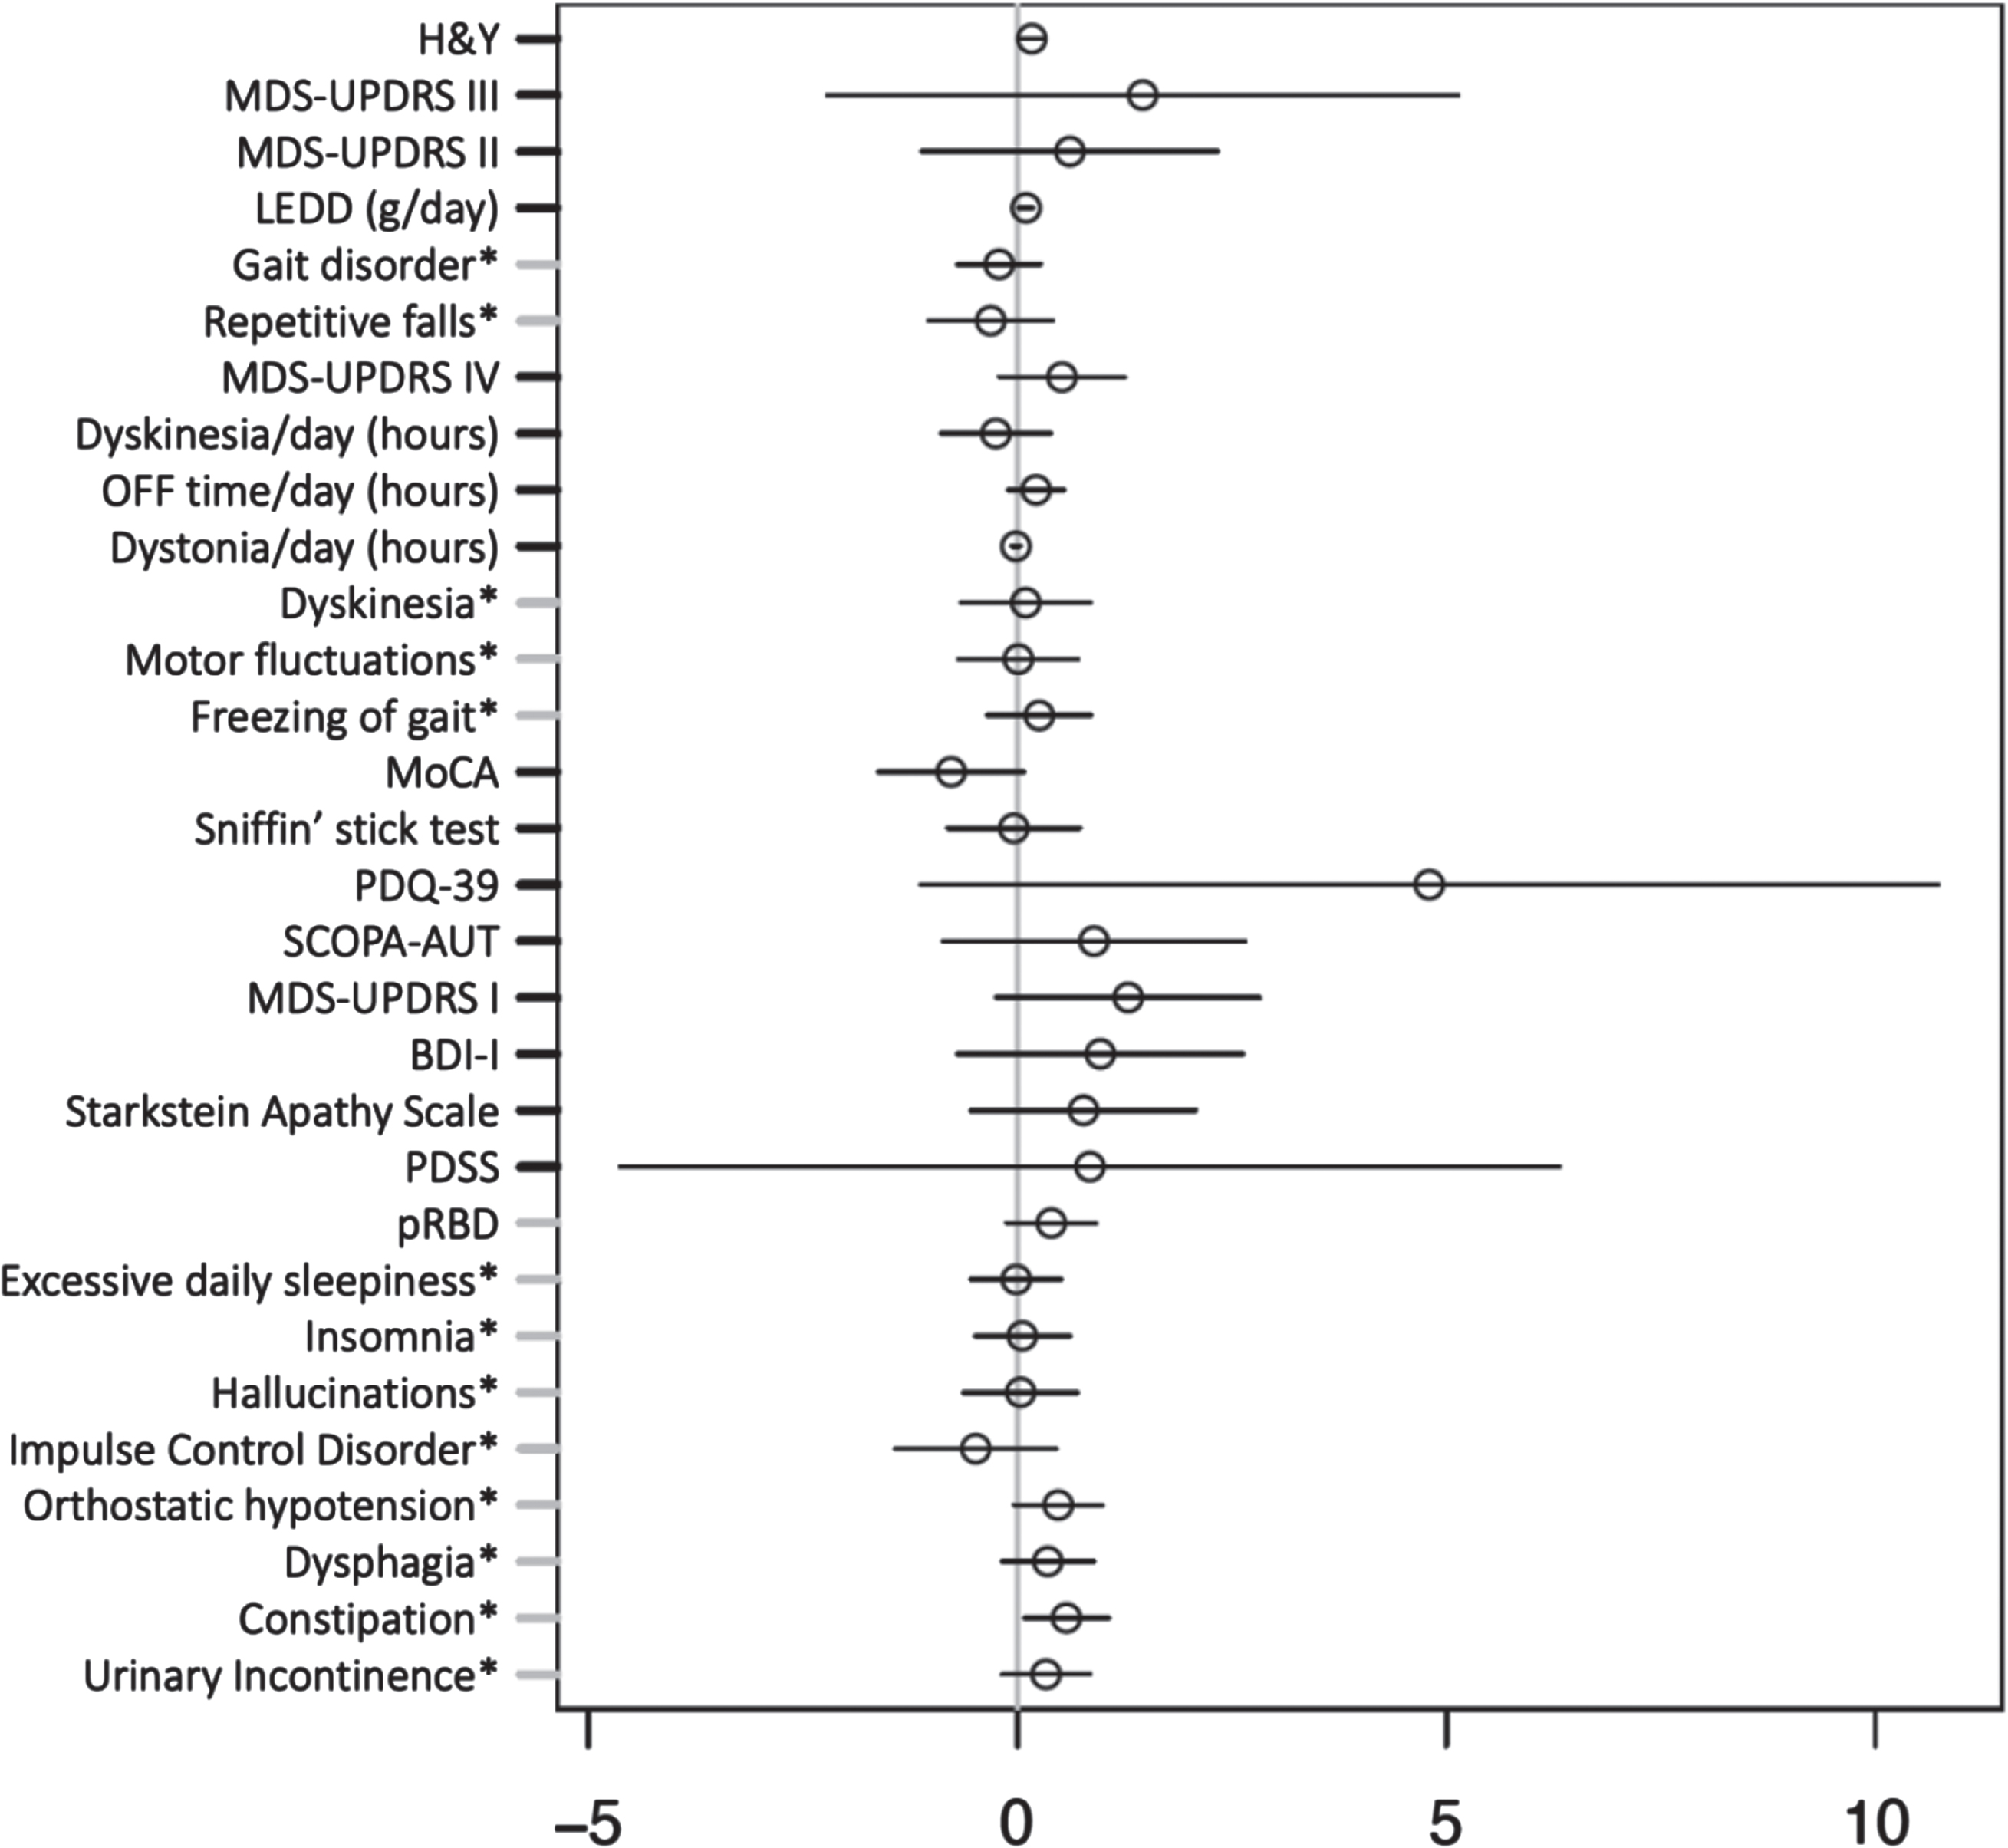 Multiple regression model investigating effect of APOE ɛ4 carrier status on clinical outcomes in idiopathic Parkinson’s disease adjusted for age at assessment and disease duration. Forrest plot with estimated coefficients and corresponding confidence intervals (±1.96 x standard error) for APOE ɛ4 genotype, from linear/logistic regression of numerical/binary outcome on disease duration, age at assessment (AAA), and APOE (binary outcomes are annotated by asterisk). The color blue indicates significant negative effects of APOE ɛ4 genotype on the clinical outcome, and the color red indicates significant positive effects at the Bonferroni-adjusted 5% level. Clinical symptoms and scales are described in the Supplementary Material.